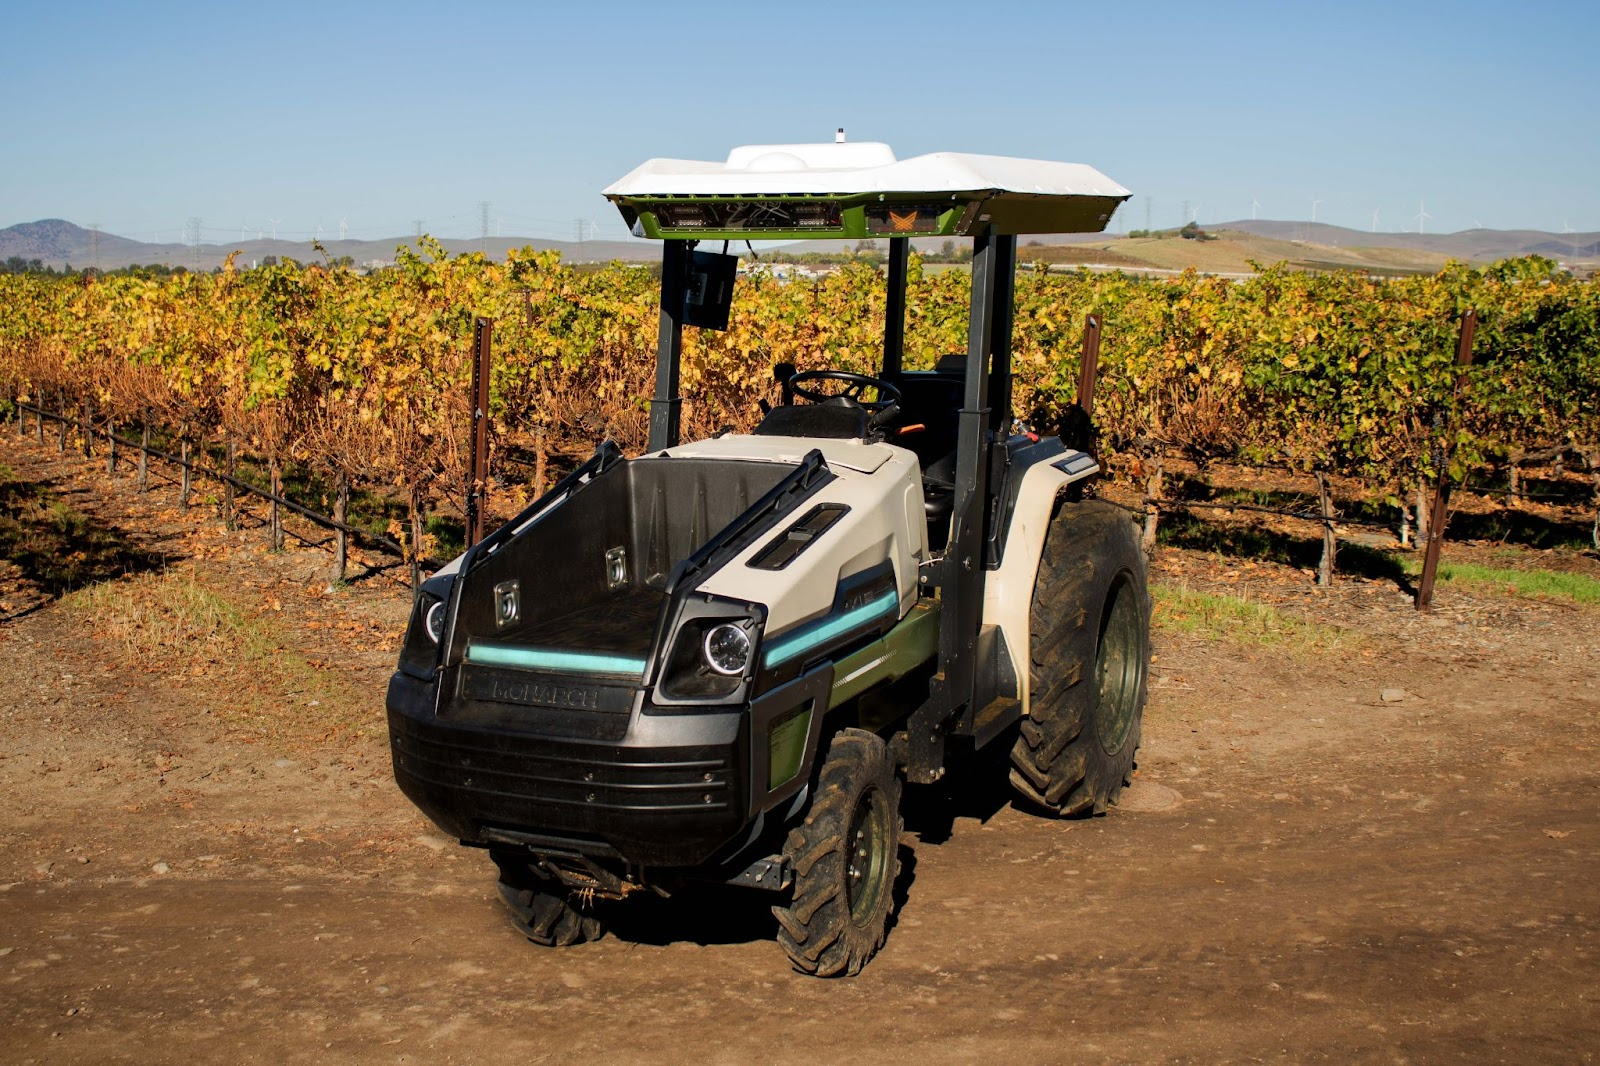 Monarch Tractor Secures $61M in Series B Funding to Accelerate Production and Deployment of Smart, Driver-Optional, Electric Tractor